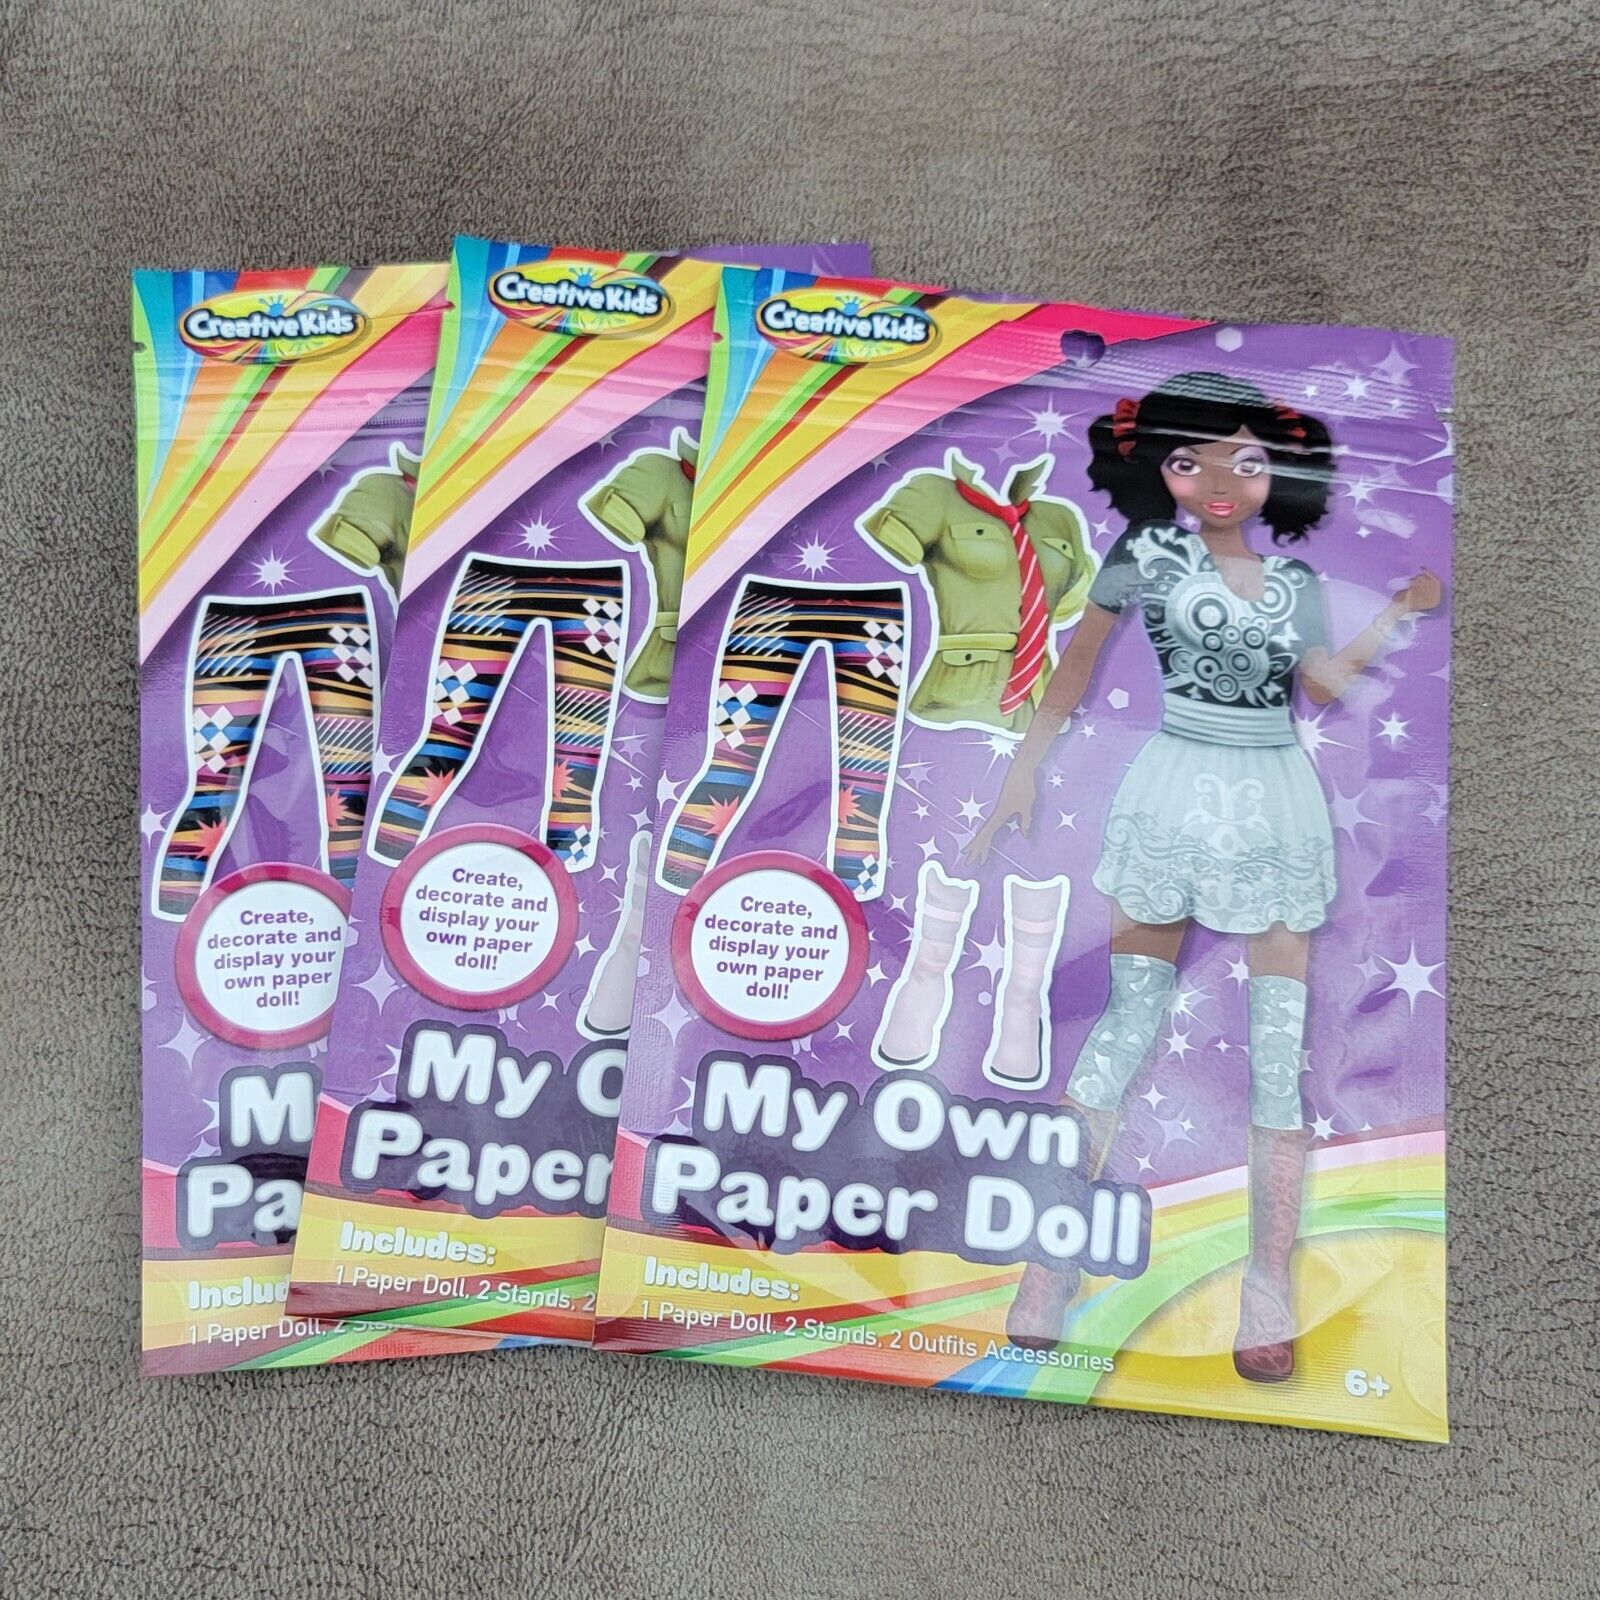 3 My Own Paper Doll Creative Kids Sticker Sheets Party Prize Basket Filler Gift Creative Kids